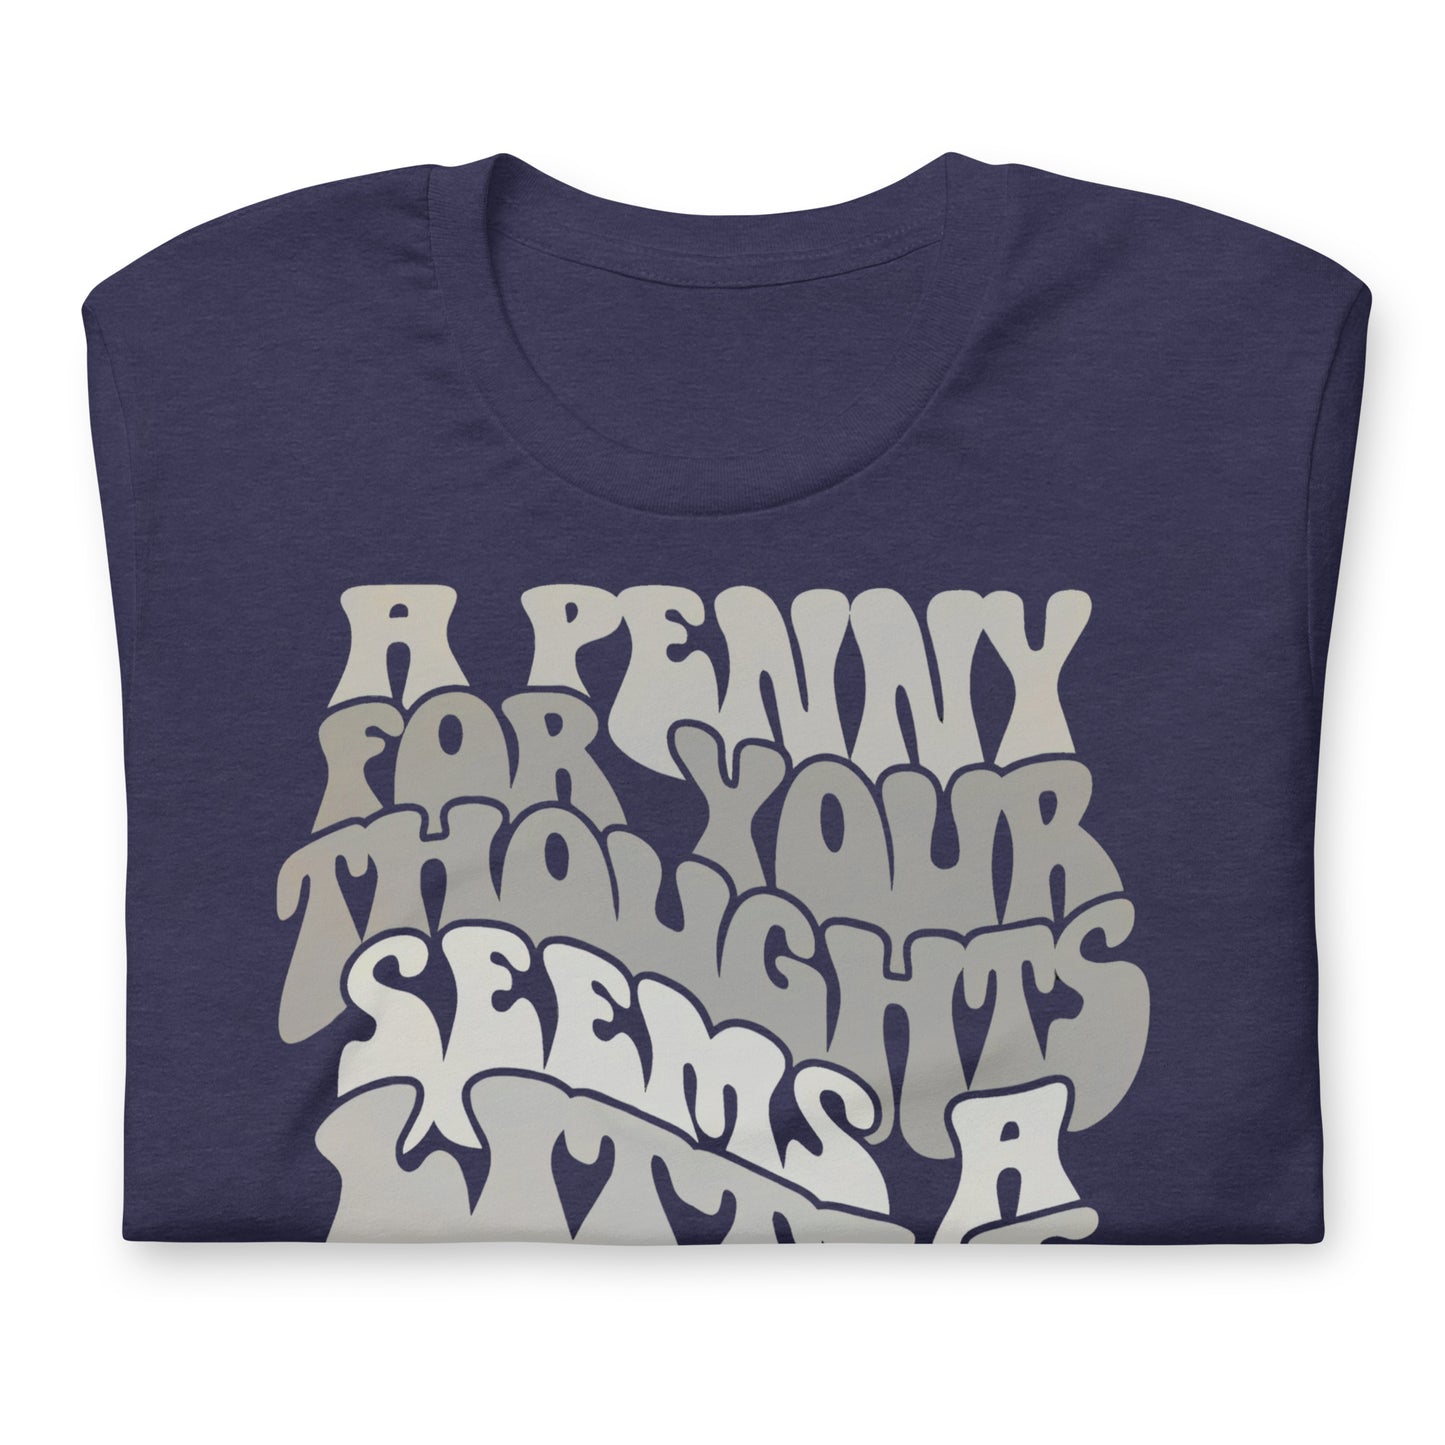 A Penny For Your Thoughts Seems A Little Pricey Funny Bella Canvas Adult T-Shirt